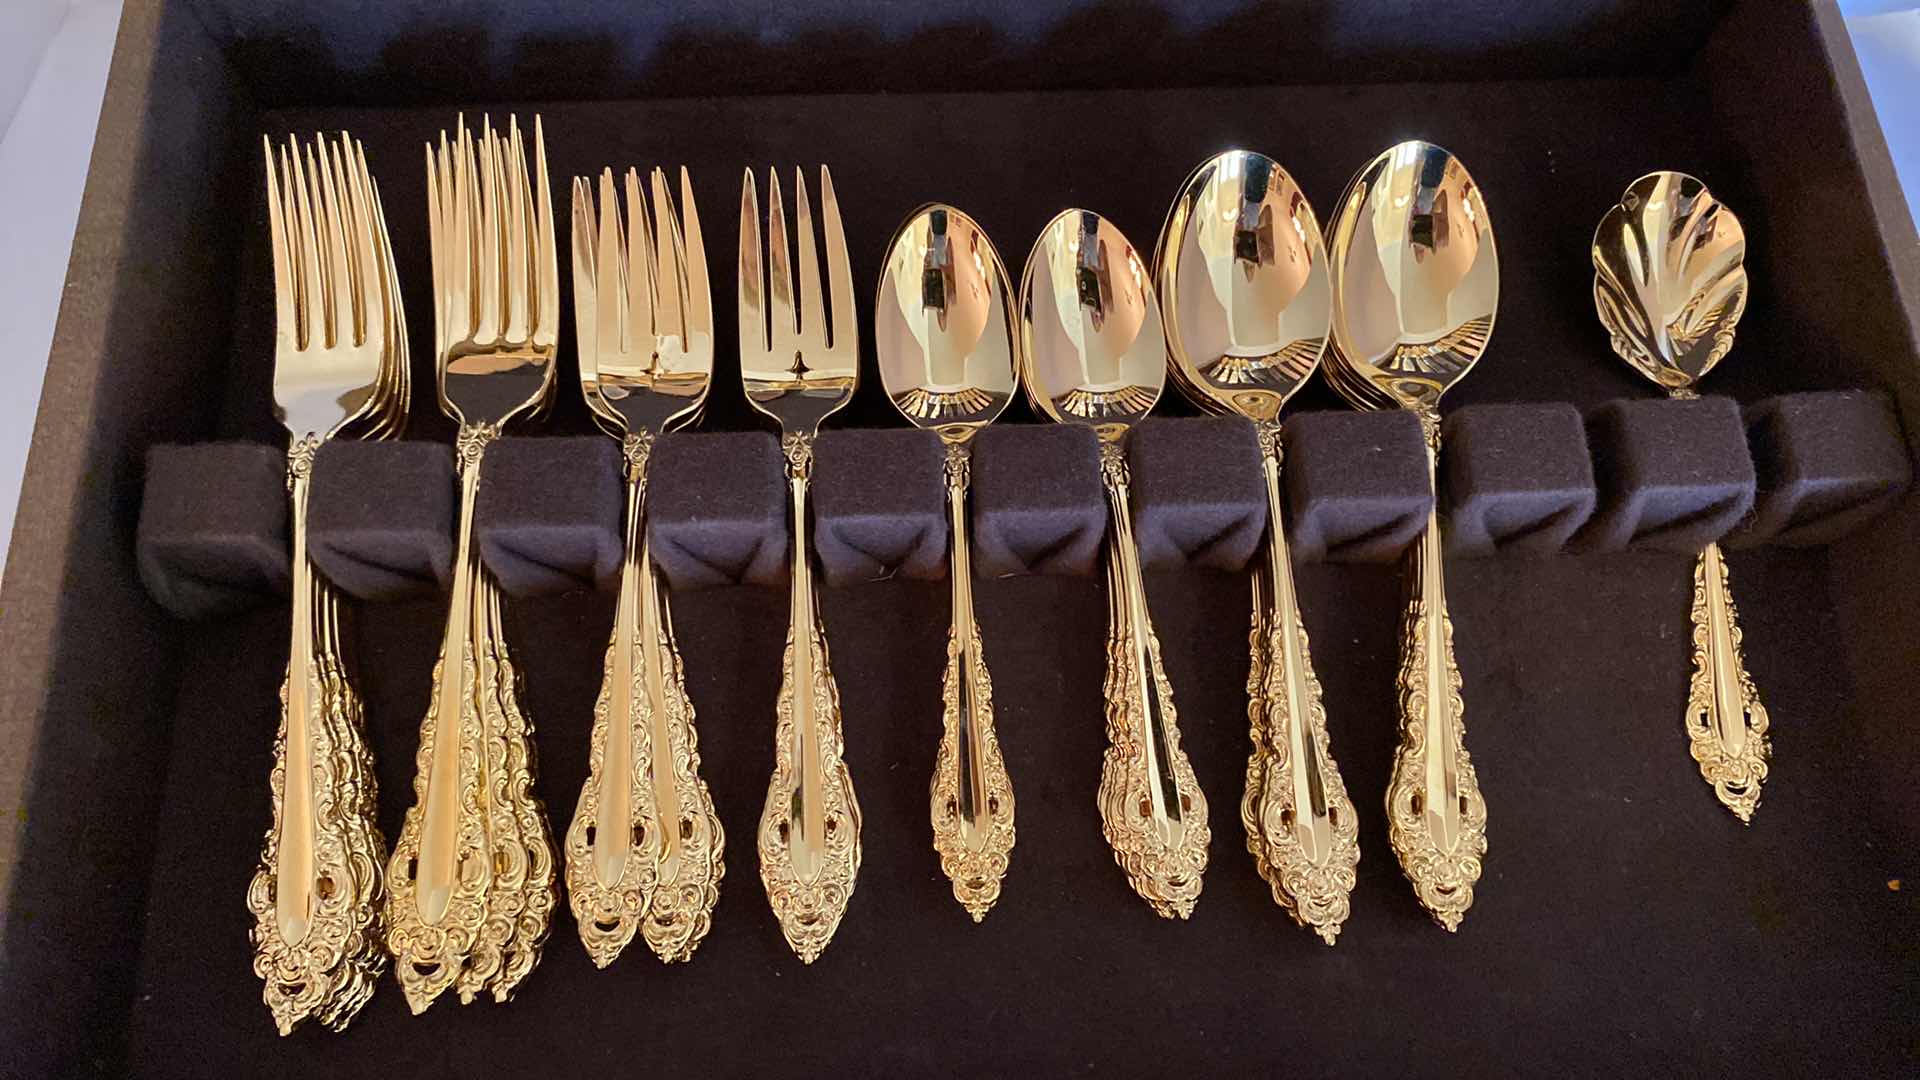 Photo 3 of COMMUNITY GOLD ELECTROPLATE SERVICE FOR 12 PATTERN GOLDEN ROYAL GRANDEAUB WITH SERVING PIECES